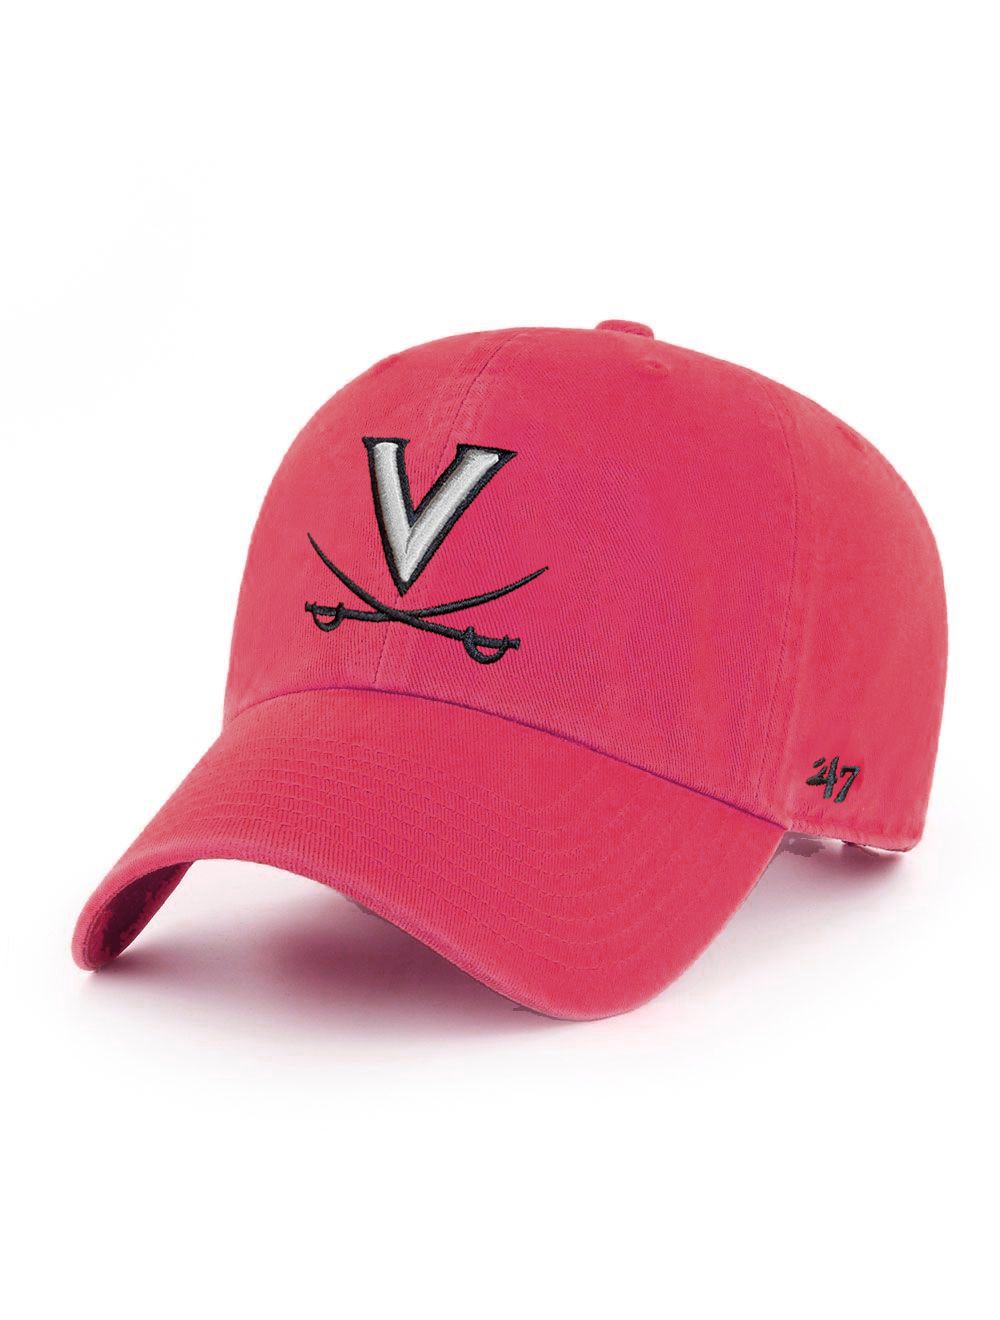 47 Brand Ladies Washed Pink V and Crossed Sabers Hat - Mincer's of